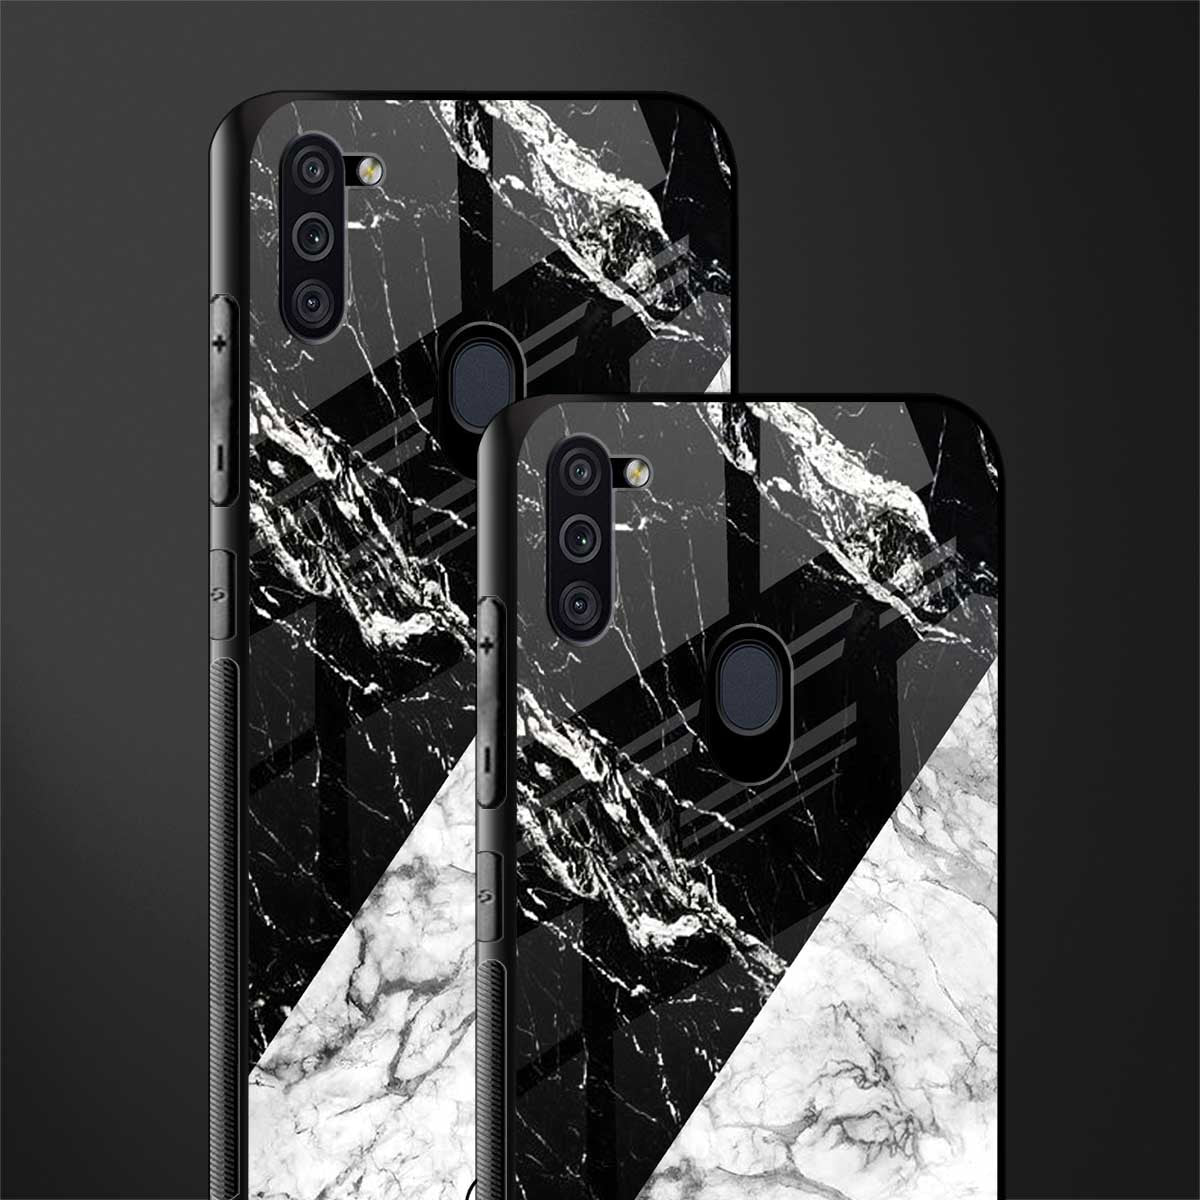 fatal contradiction phone cover for samsung a11